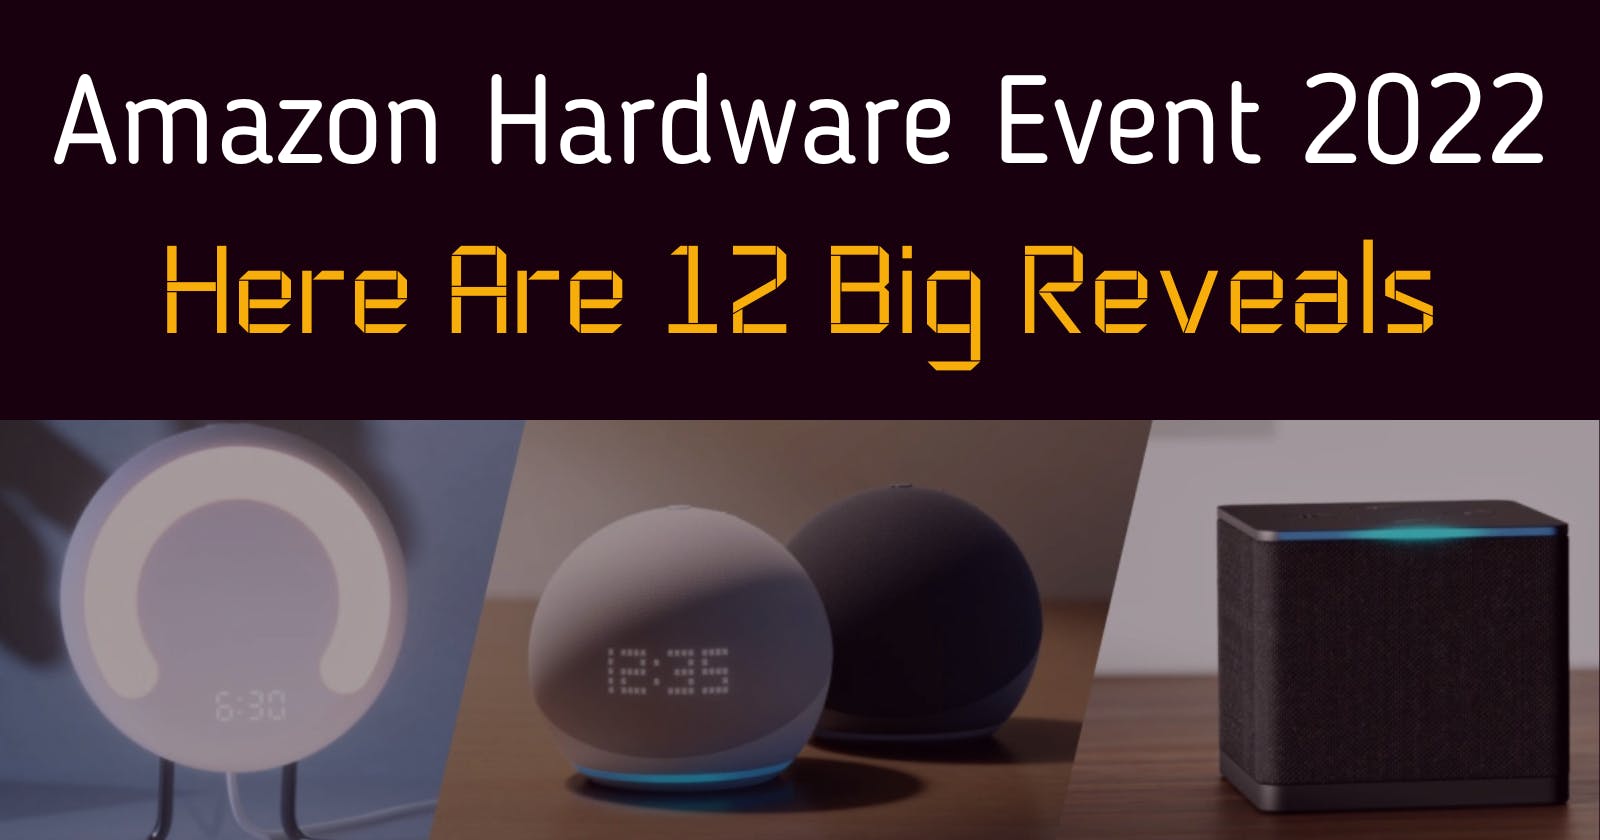 Amazon Hardware Event 2022: Here Are 12 Big Reveals And More